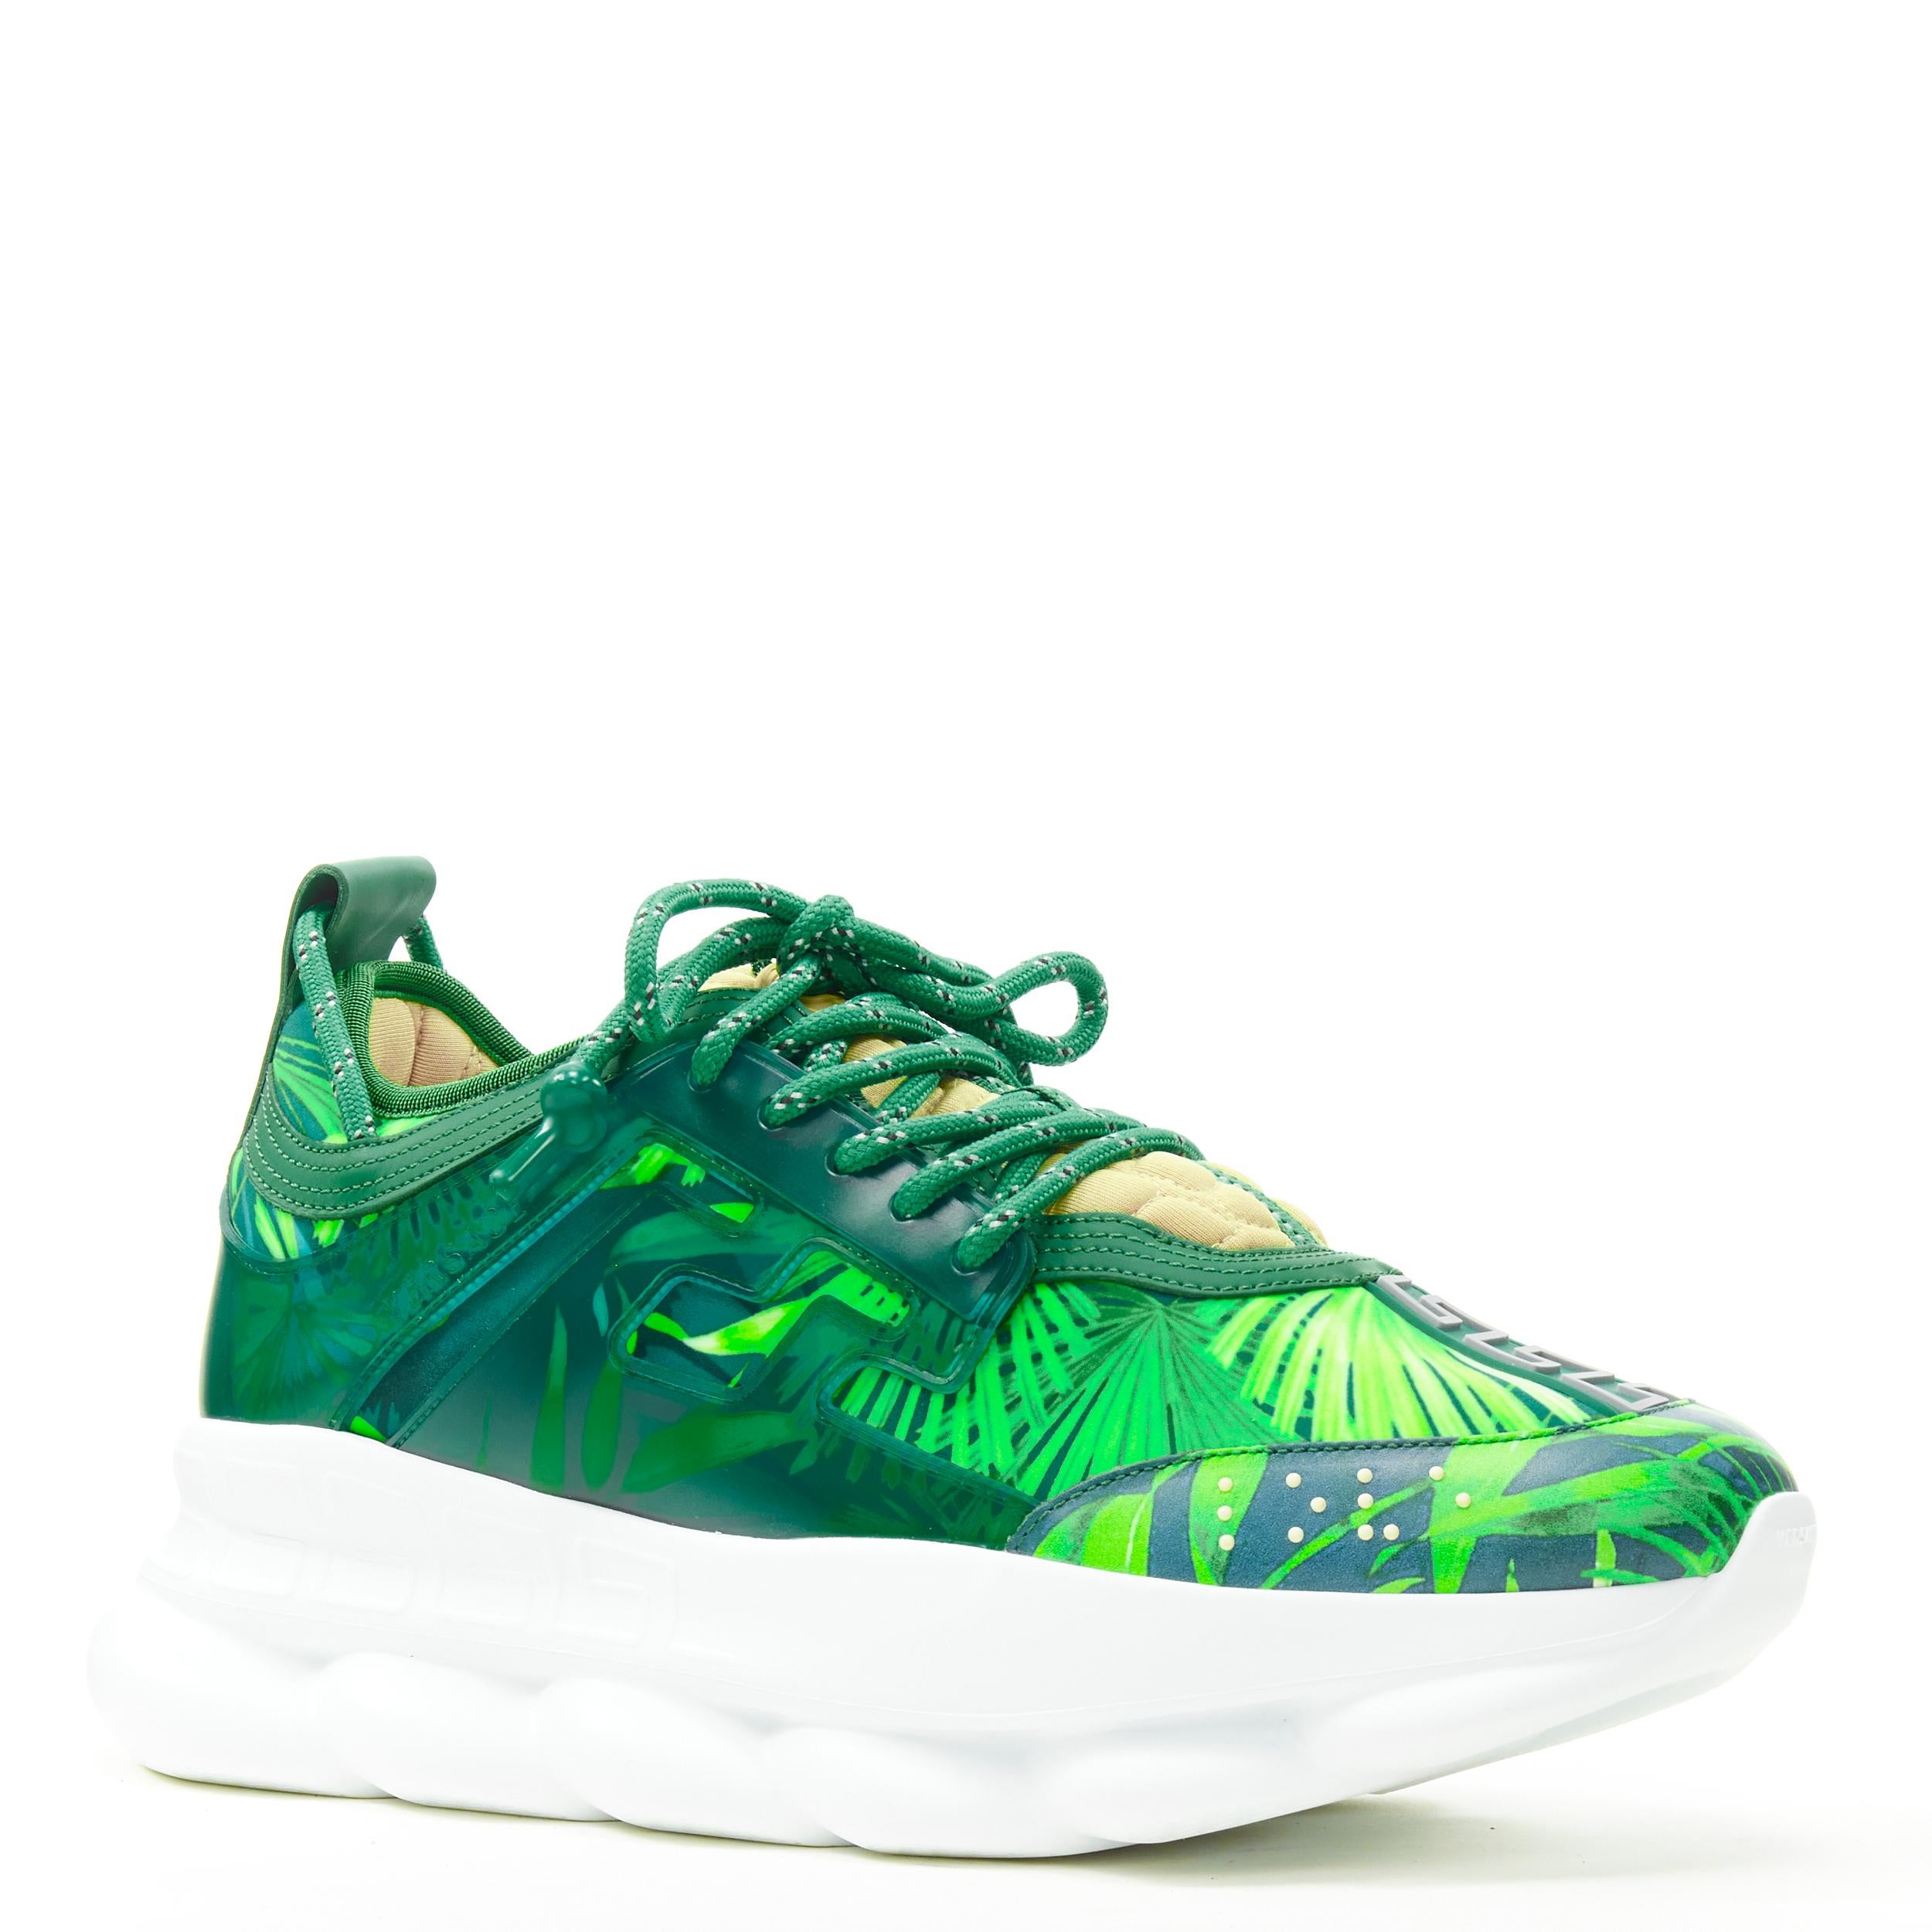 new VERSACE Chain Reaction Jungle Print green chunky sole sneaker EU36 rare 
Reference: TGAS/C00104 
Brand: Versace 
Designer: Donatella Versace 
Model: Chain Reaction 
Collection: Spring Summer 2020 Runway 
Material: Leather 
Color: Green 
Pattern: